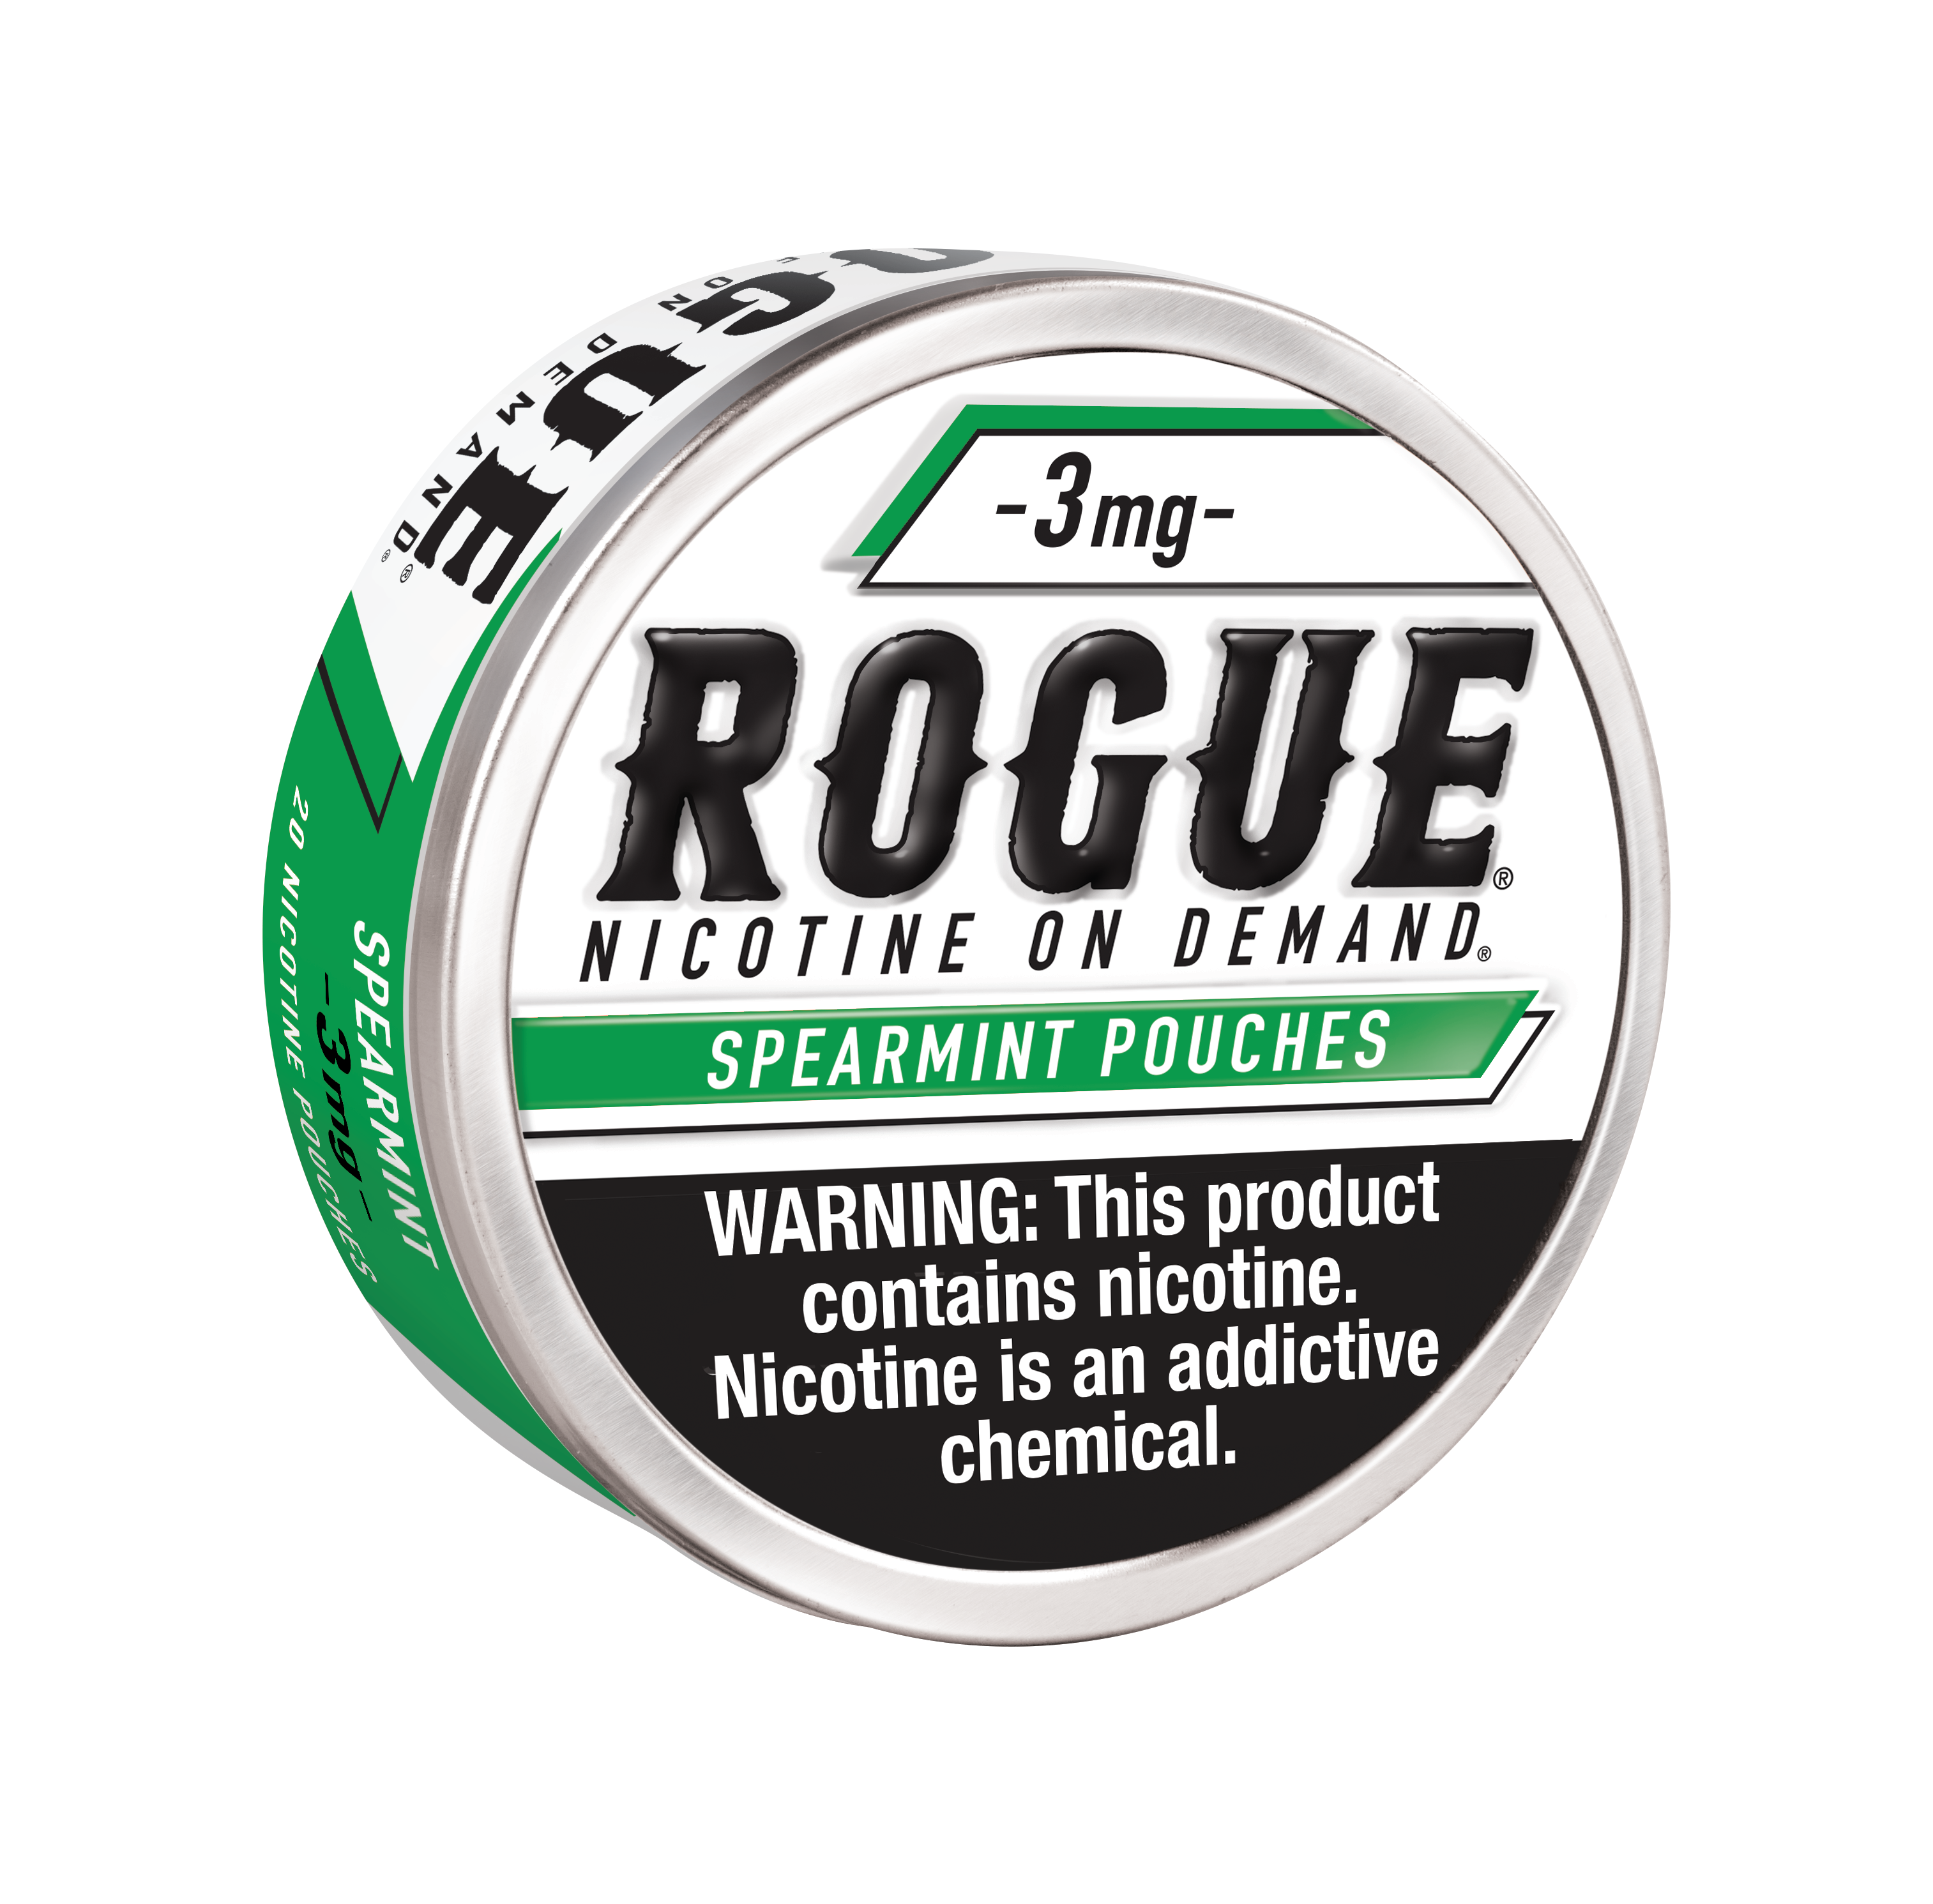 Rogue spearmint nicotine pouch 3mg 5ct